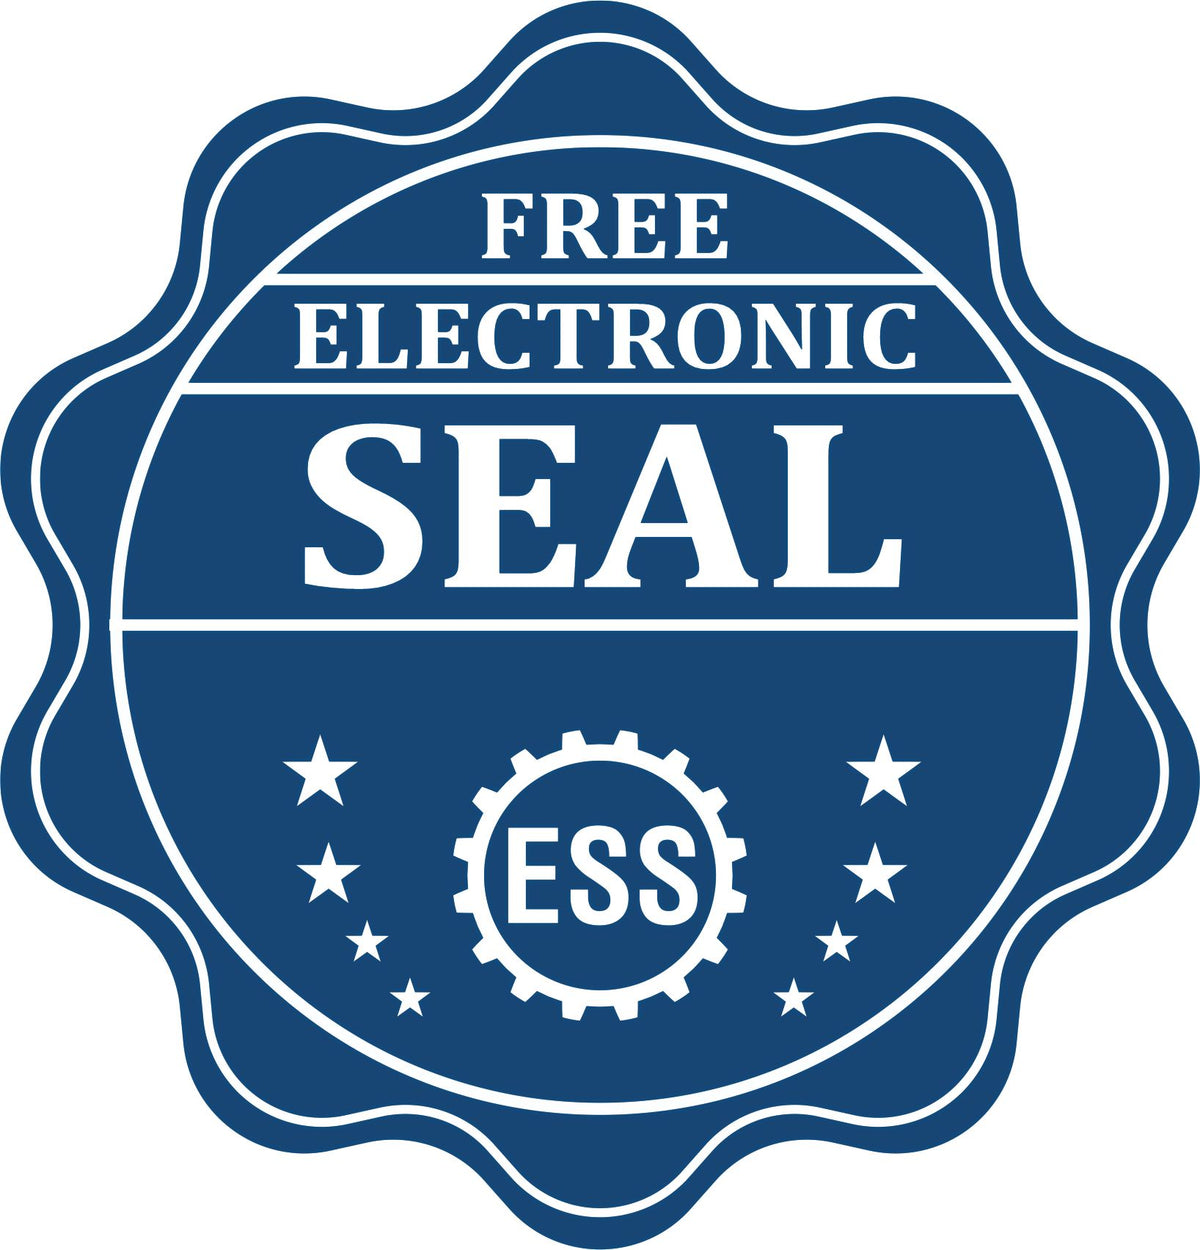 A badge showing a free electronic seal for the State of Kansas Extended Long Reach Geologist Seal with stars and the ESS gear on the emblem.